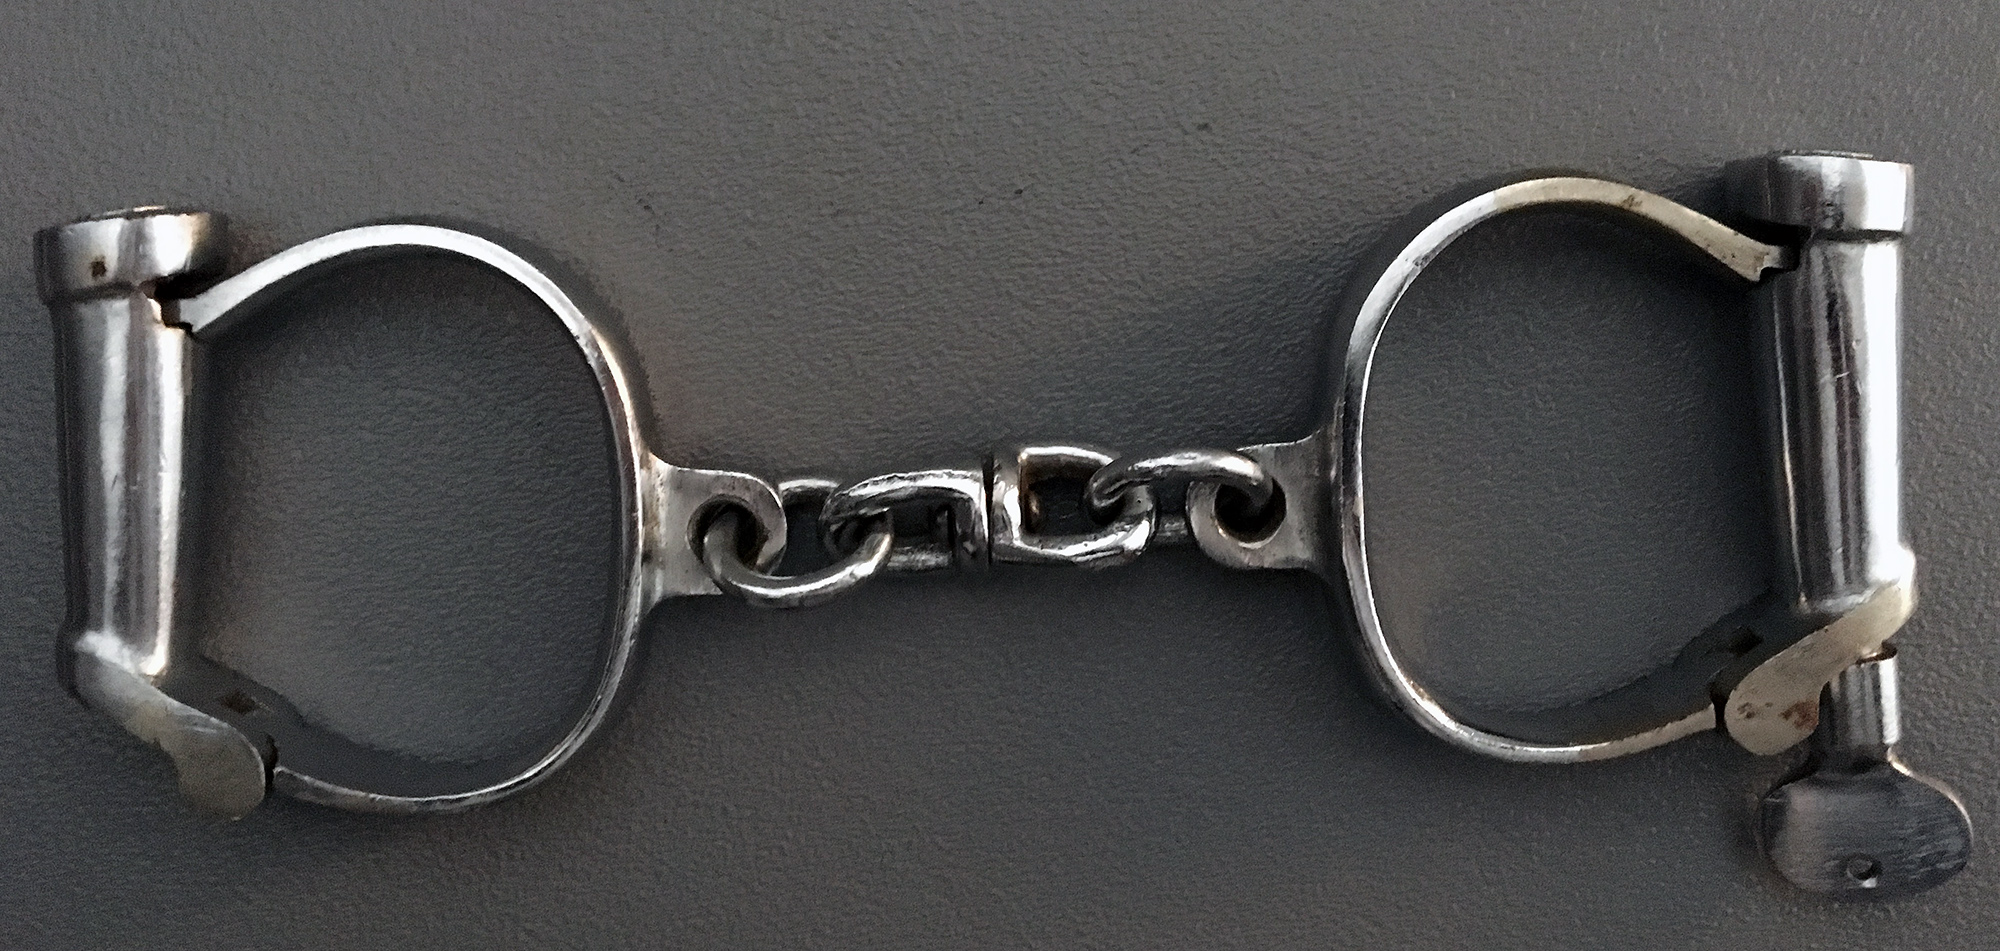 FOR SALE: VINTAGE ENGLISH DARBY STYLE HANDCUFFS W/ORIG KEY — Old Handcuffs .Net